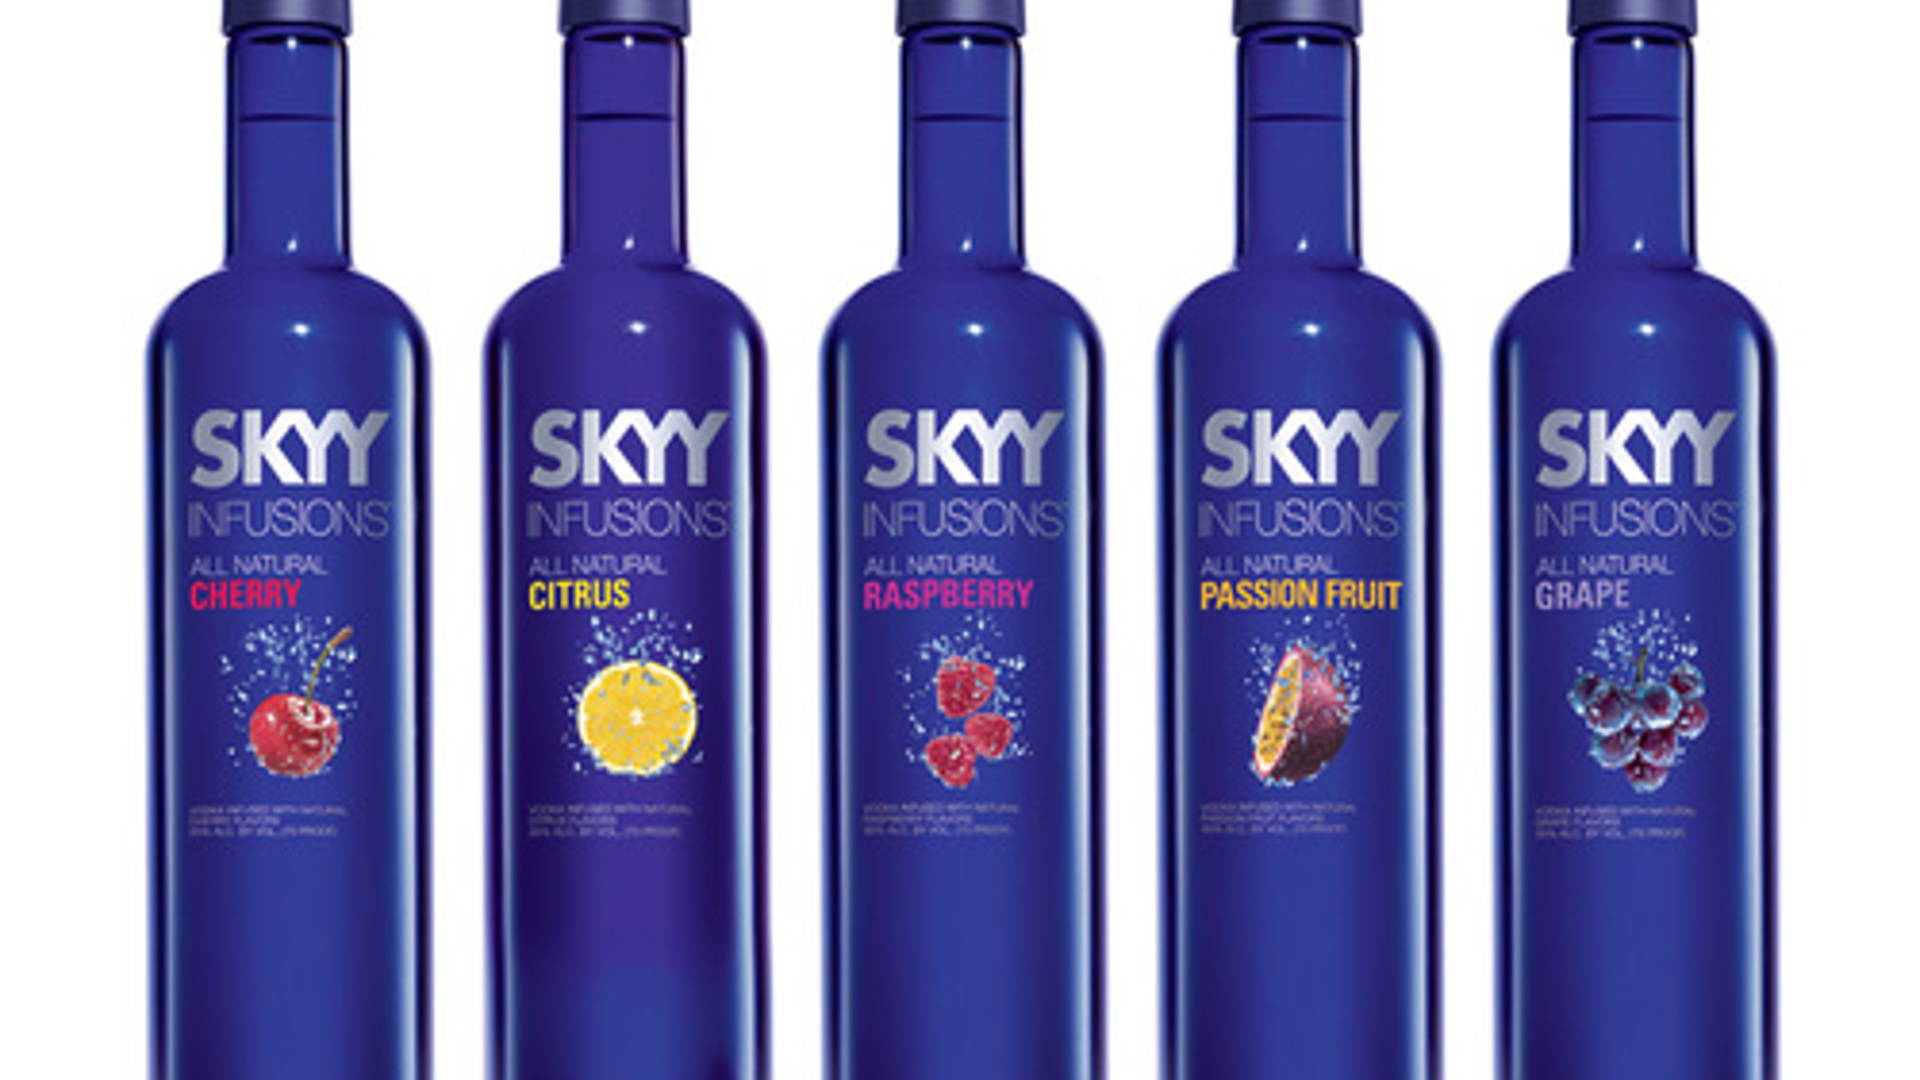 Featured image for SKYY Infusions